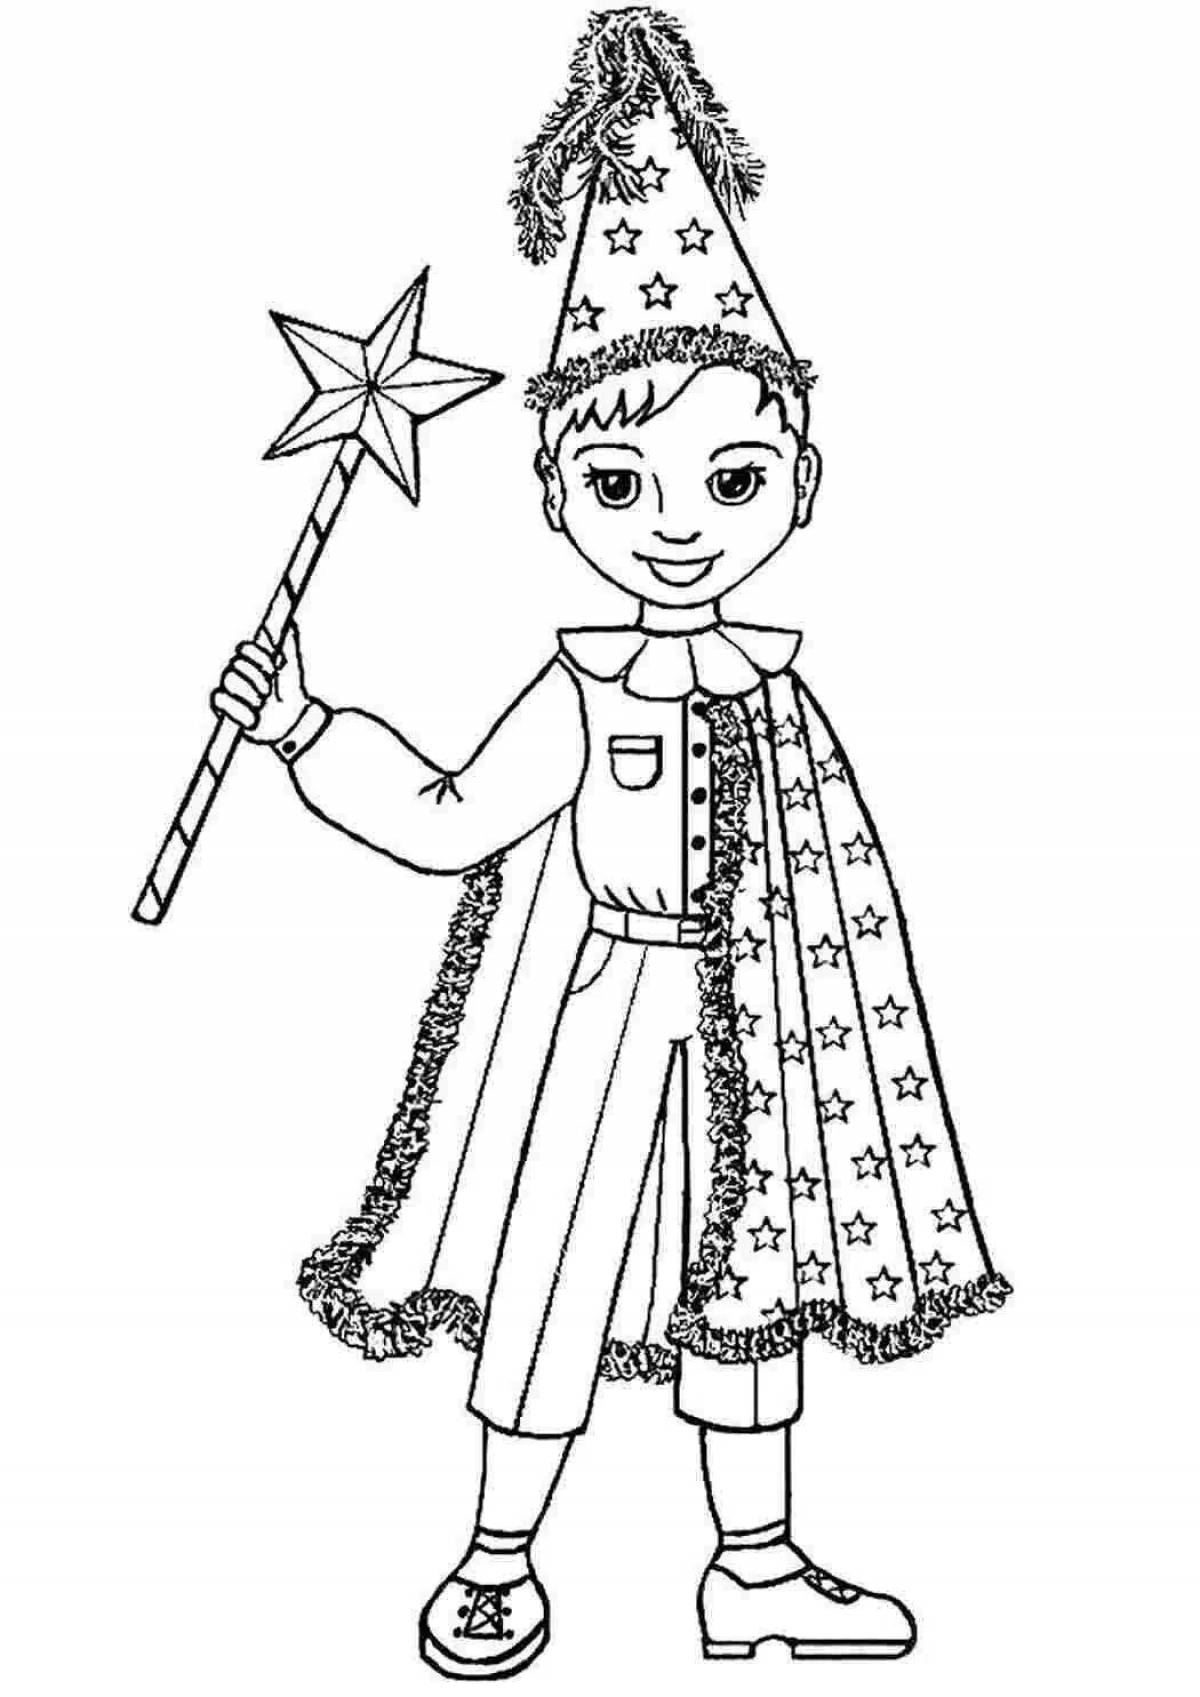 Magic costume coloring book for kids